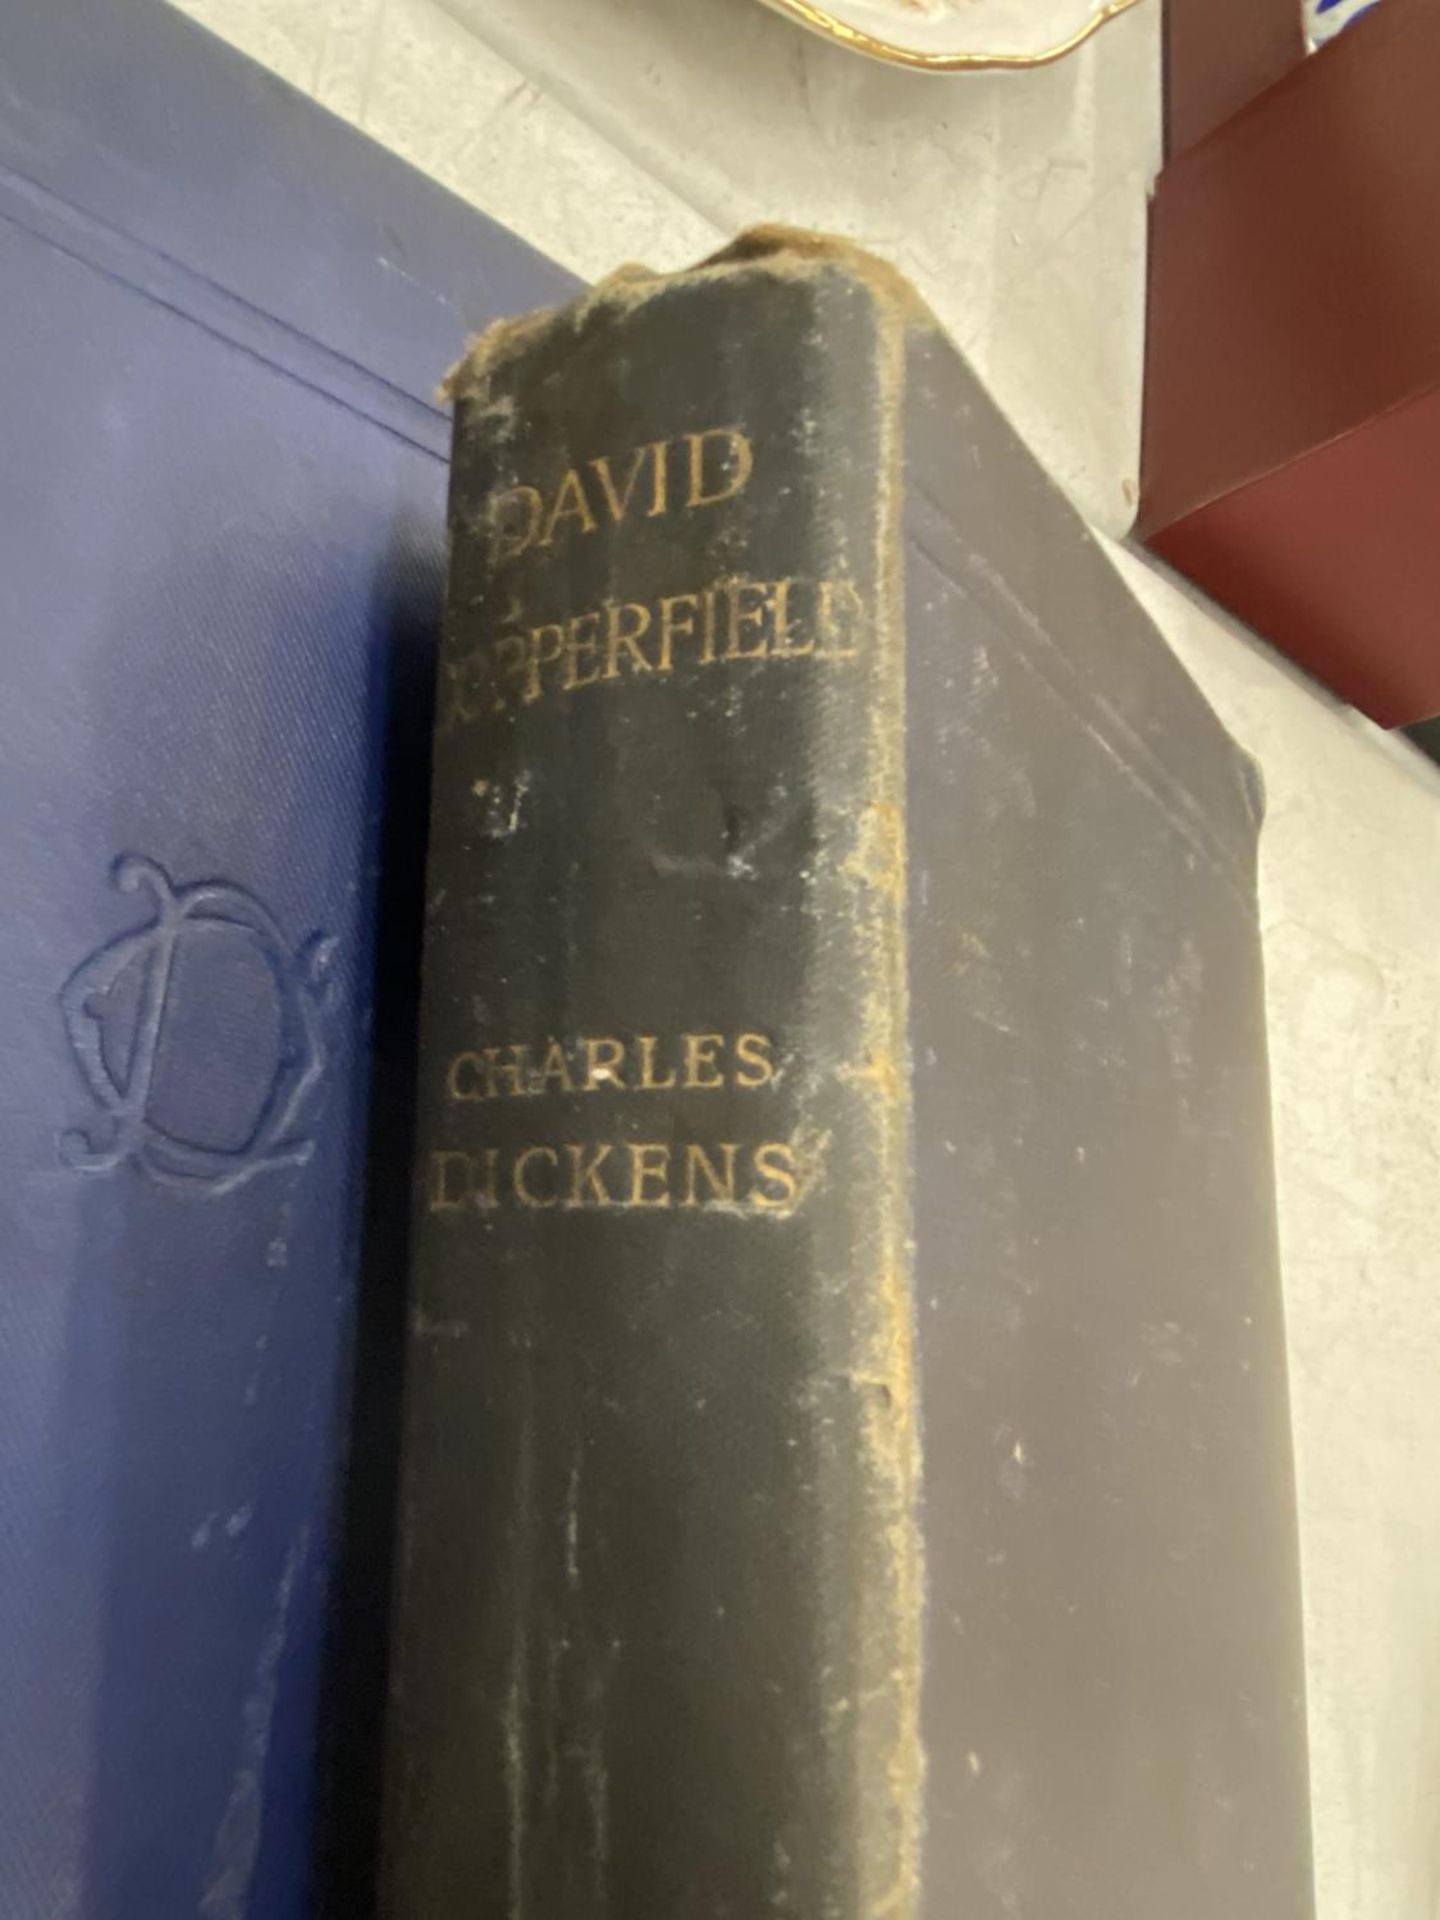 TWO ANTIQUARIAN CHARLES DICKEN NOVELS - 'DAVID COPPERFIELD' AND HARD TIMES AND PICTURES FROM ITALY' - Image 3 of 5